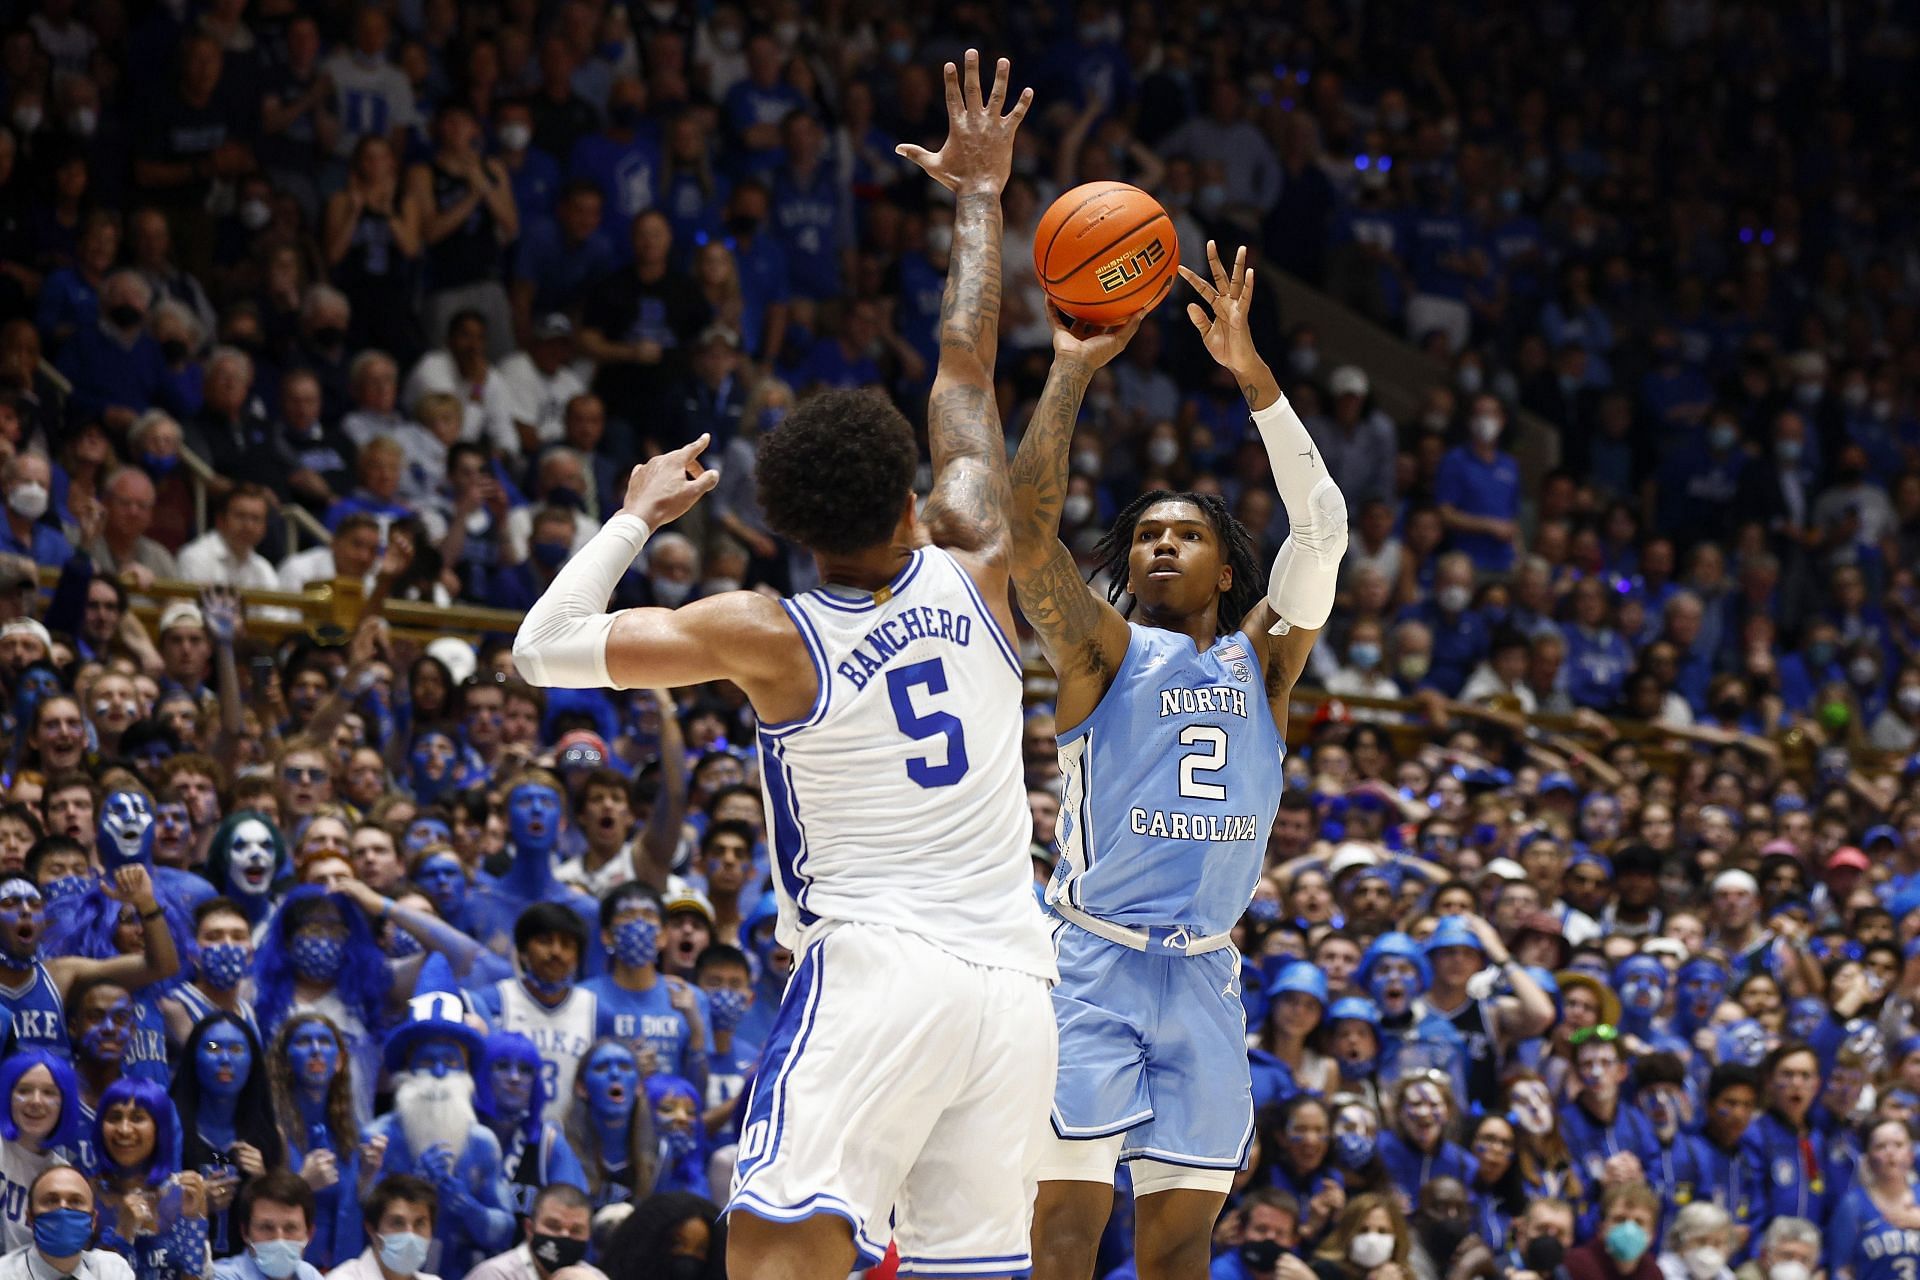 The Tar Heels and Blue Devils will go toe-to-toe at the Final Four.